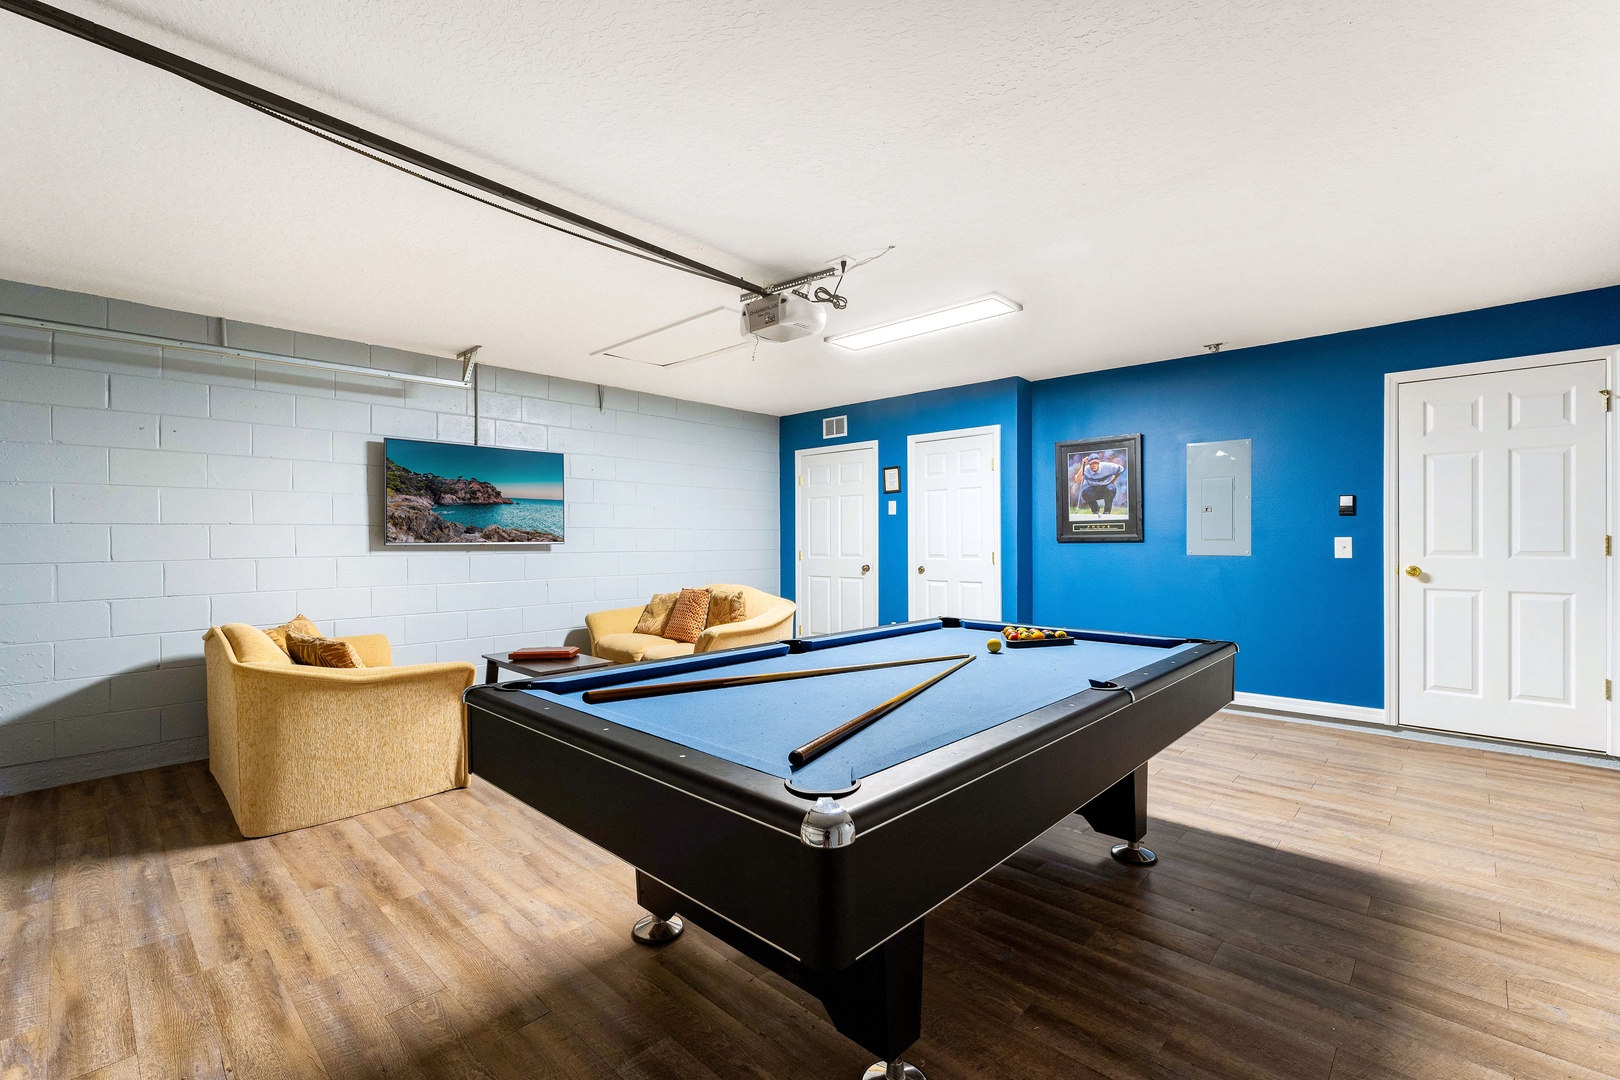 Rack 'Em Up and unwind in the game room with pool table